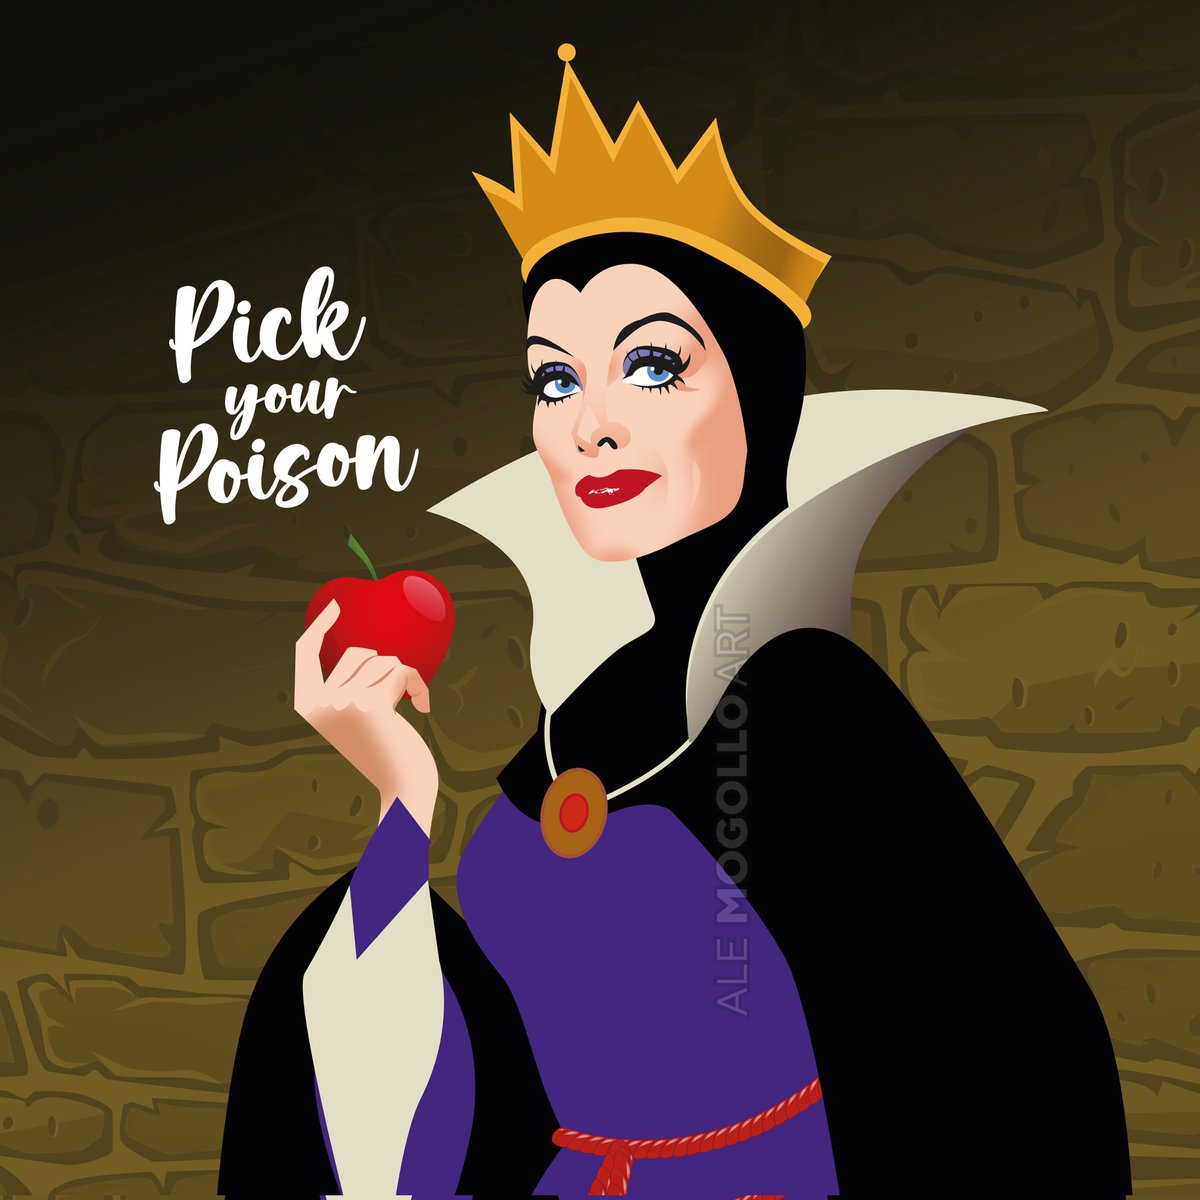 Continuing with the Disney references, here’s the ultimate Hollywood gay icon Miss Joan Crawford being the inspiration for the Evil Queen of 1937 Snow White. Did you know it? What do you think?
#joancrawford #snowwhite #evilqueen #disney #pickyourpoison #drag #dragisart #gayicon